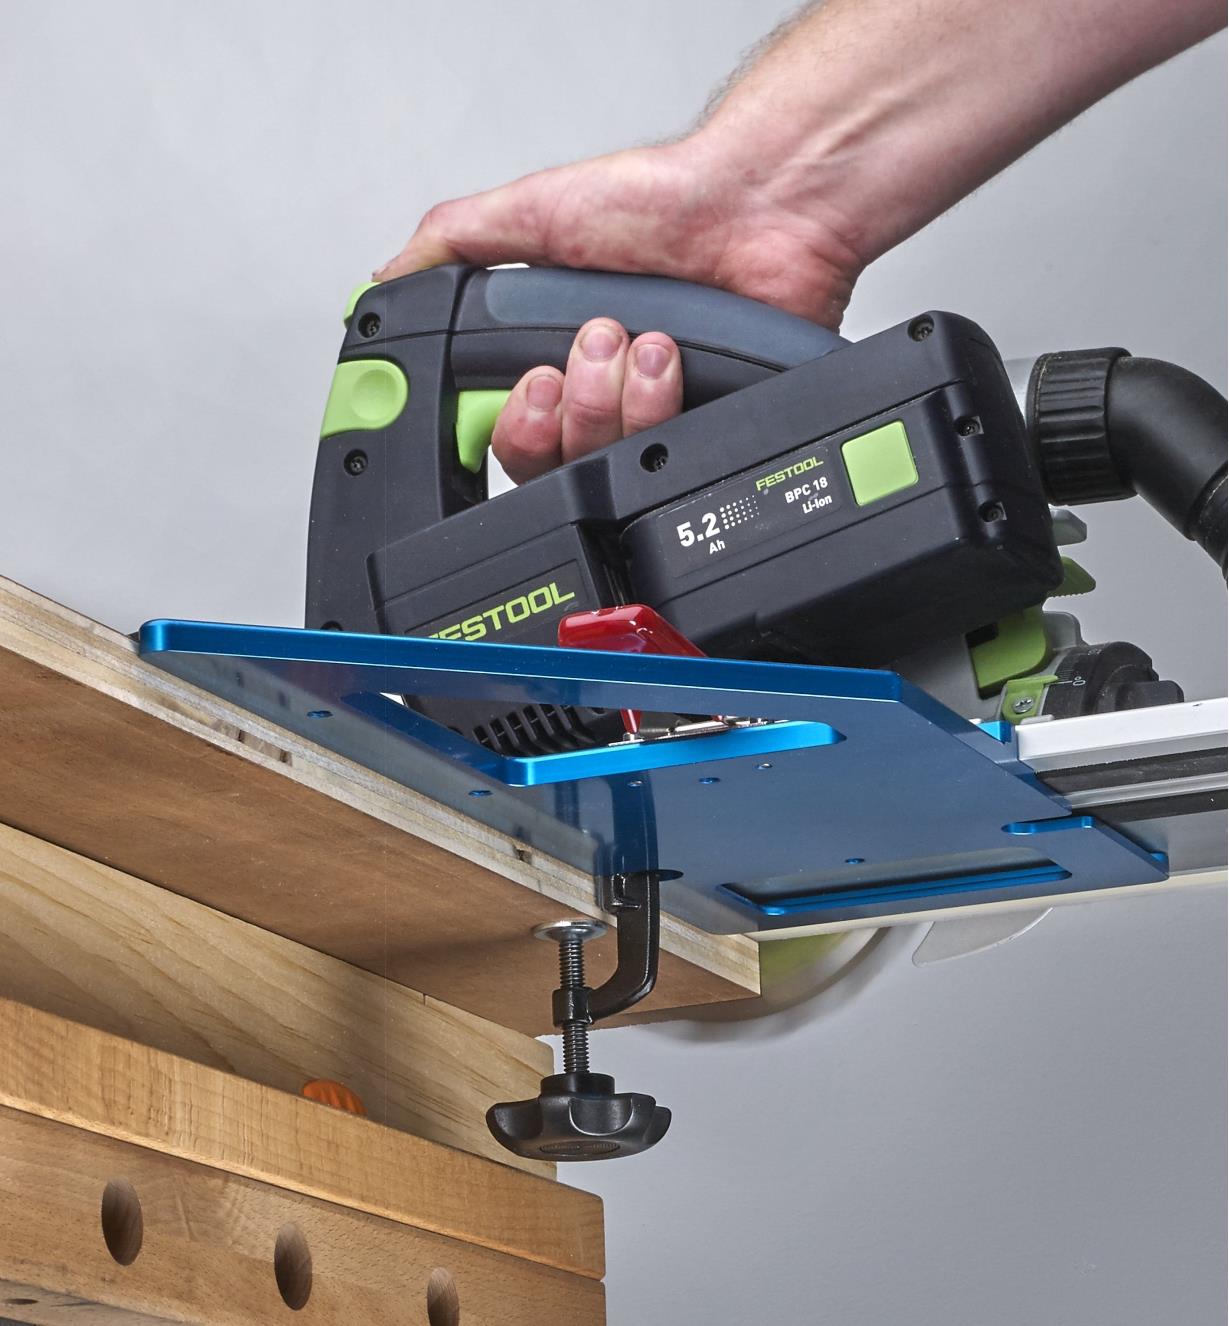 Using a track saw with a GRS-16 guide rail square on a Festool track-saw guide to cut plywood